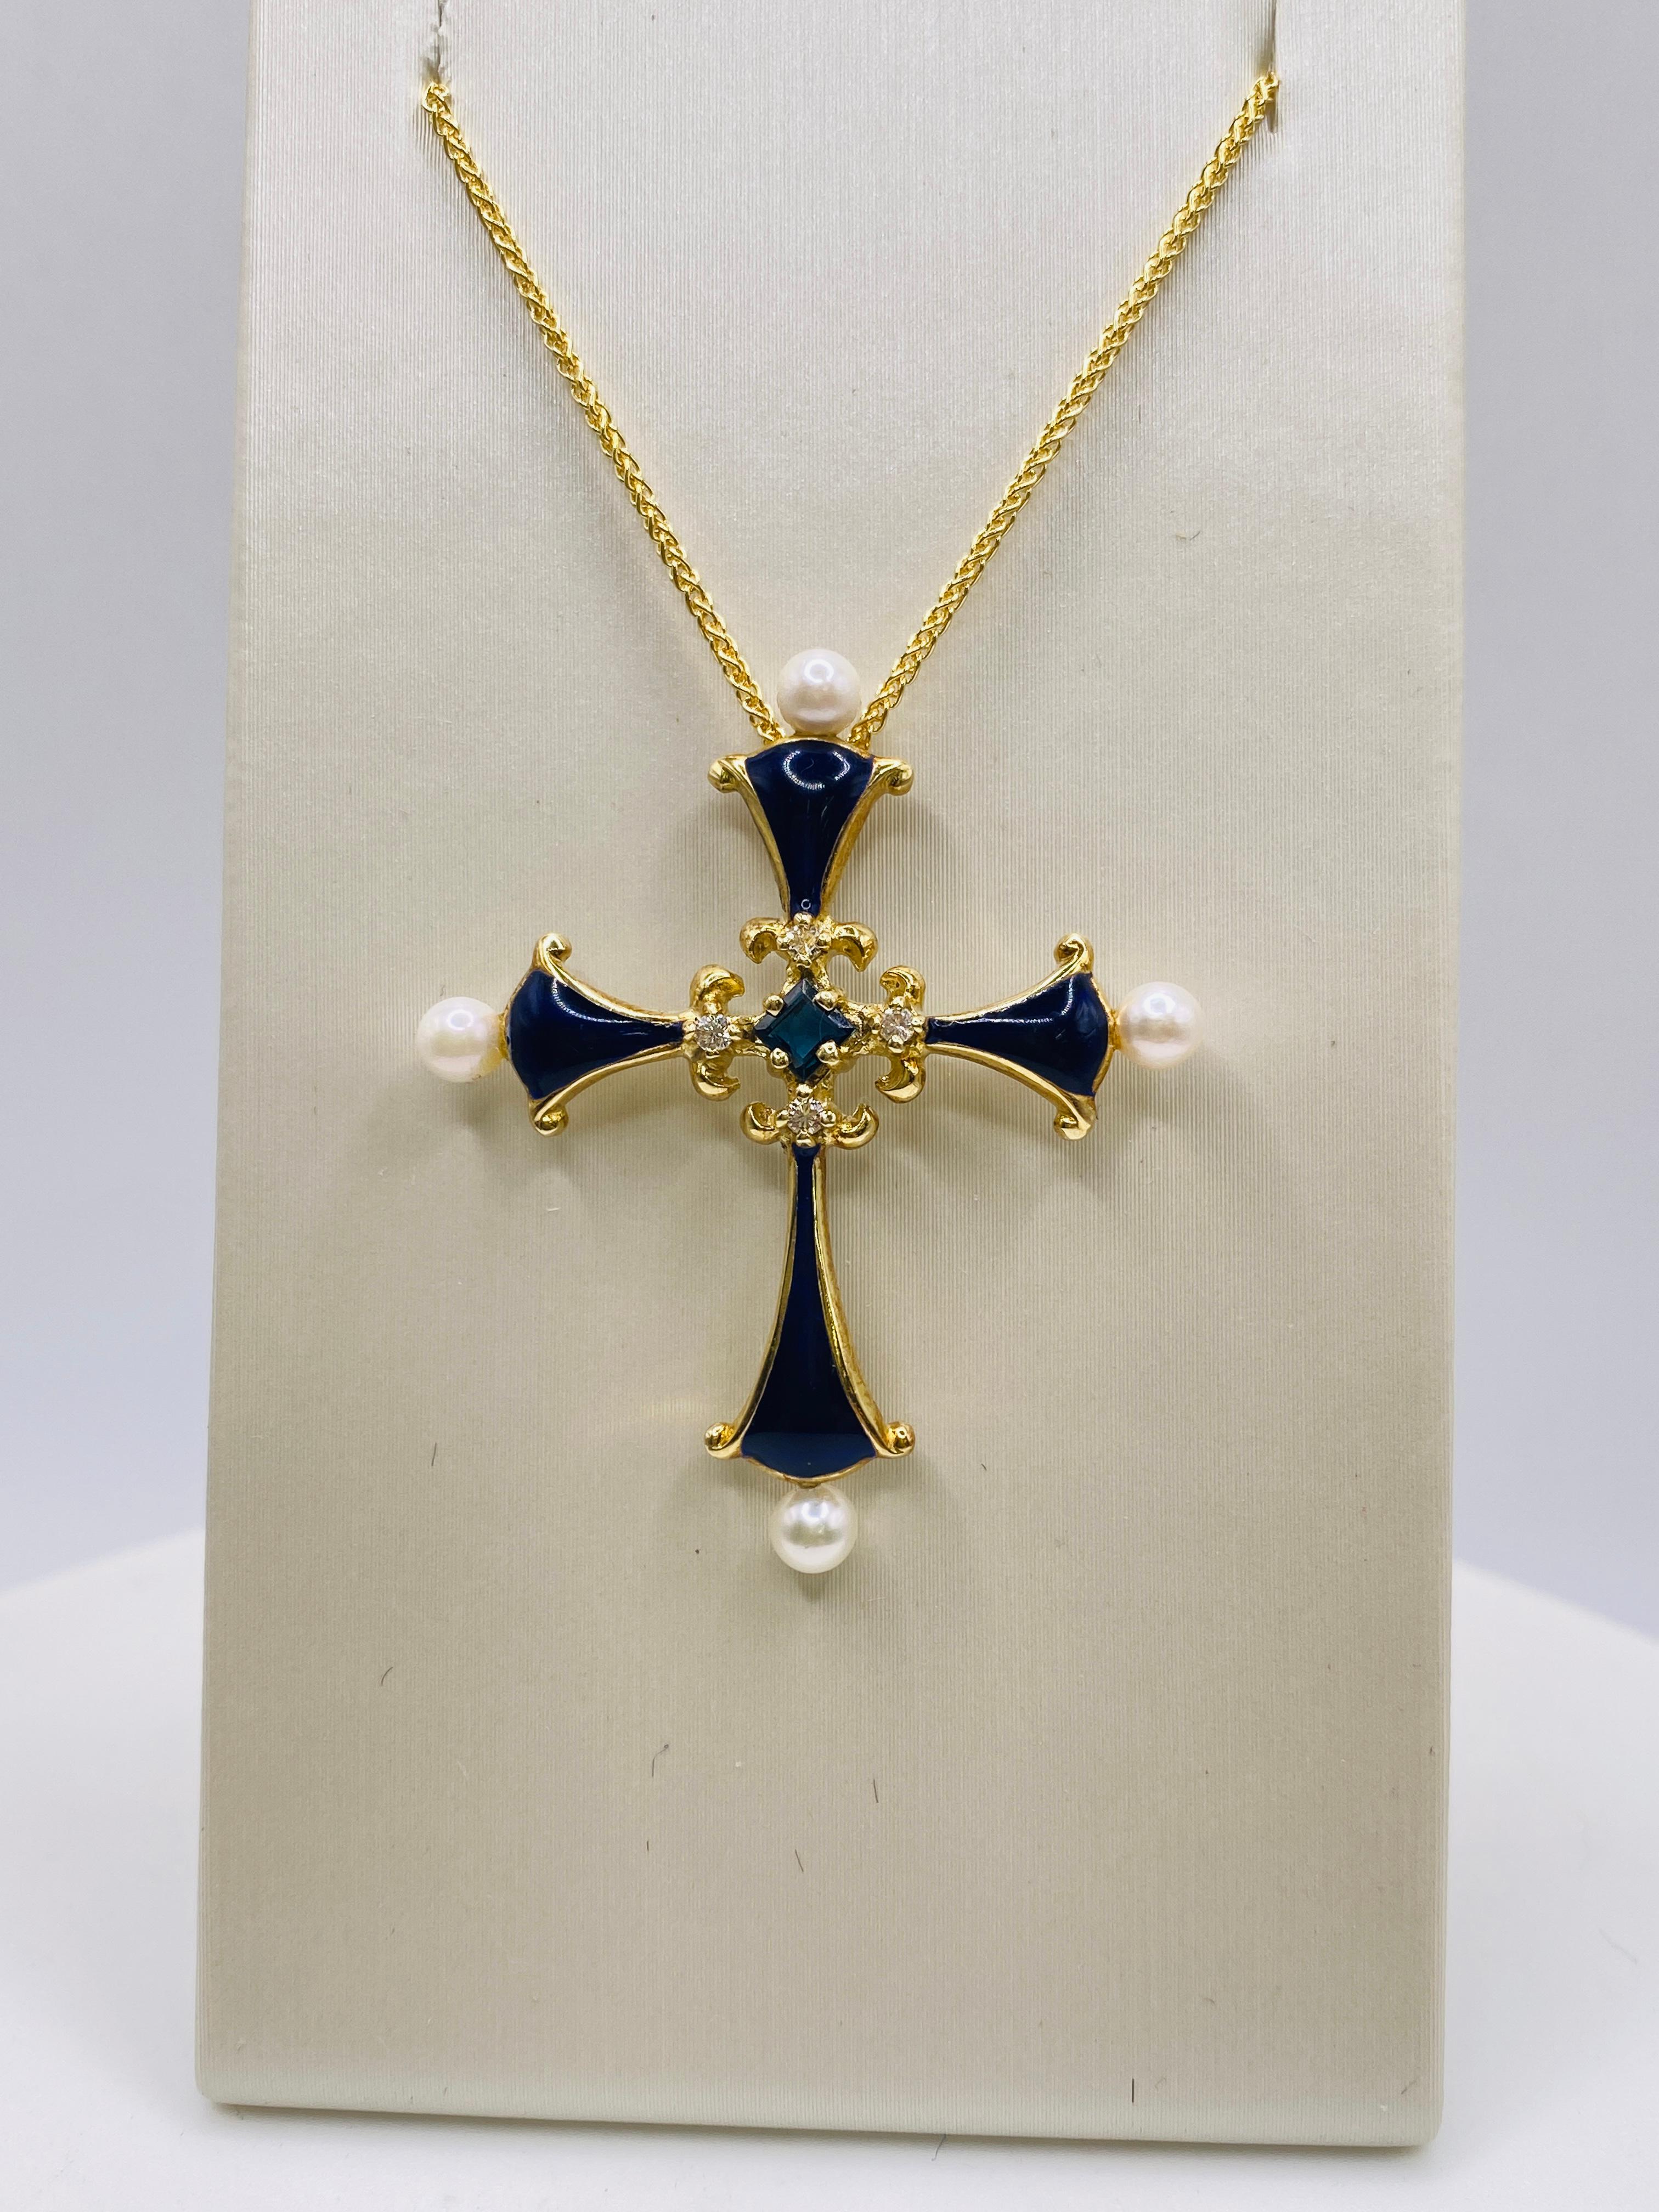 Estate enamel 14k yellow gold cross with 1= center sapphire, 4=diamonds, 4=pearls. Measures 1.5x1 inch. Chain is sold separately.